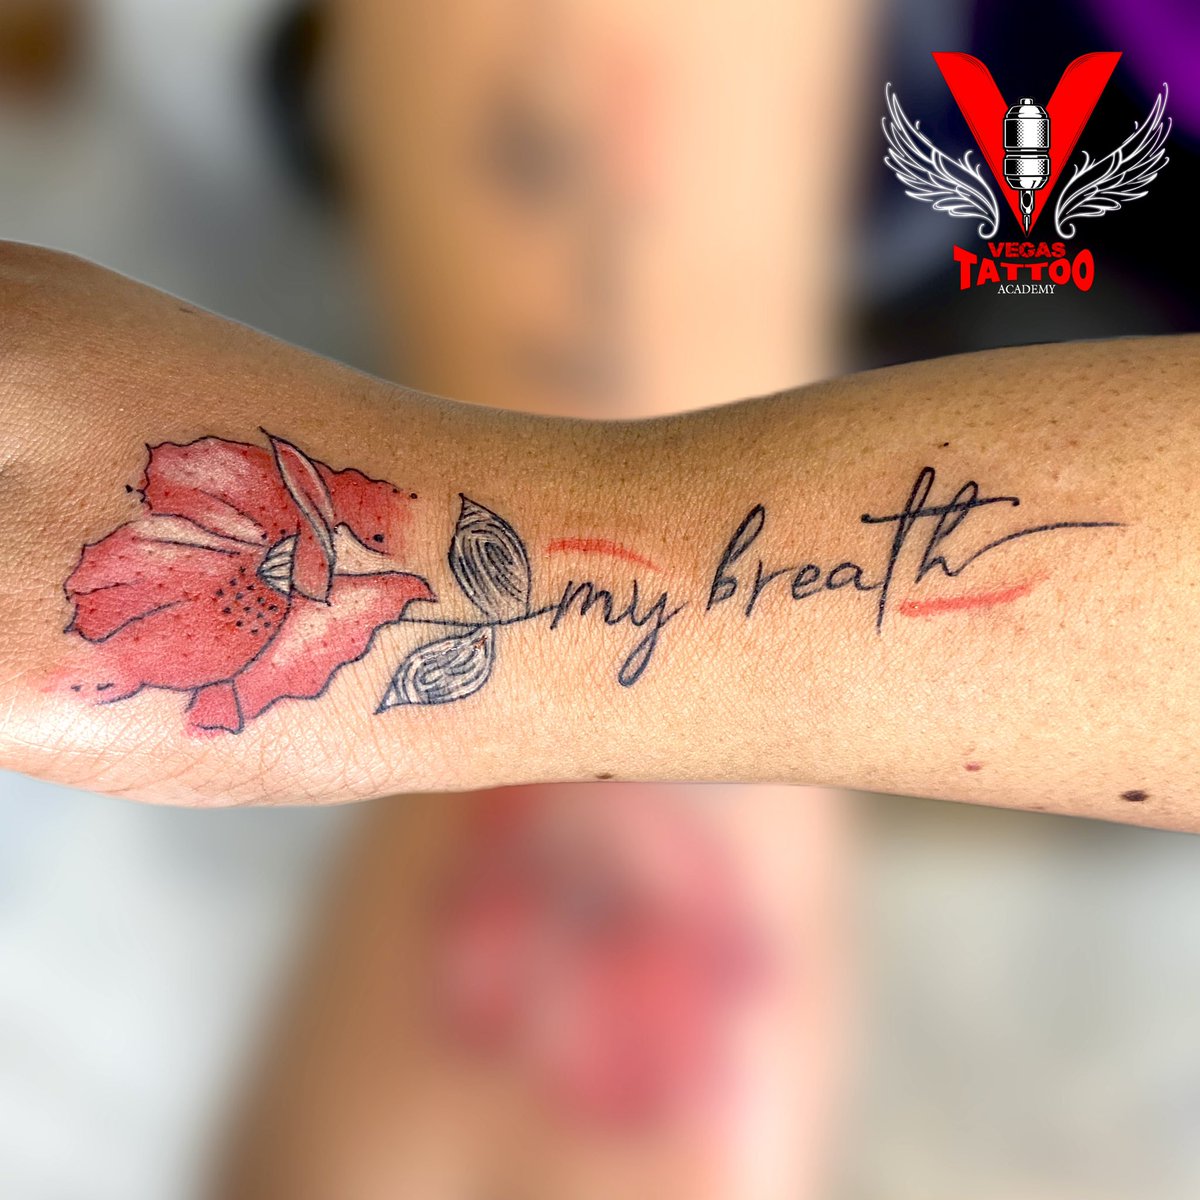 Book slot for customised designs 
To book appointment 👉🏻 9542525045.

#colourtattoo #floorart #floraltattoo #tattoo #nametattoo #womentattoo #tattoosinhyderabad #vegastattoo #besttattoo #besttattartist #besttattoostudio #besttattoostudioinhyderabad #vegastattoostudiohyderabad